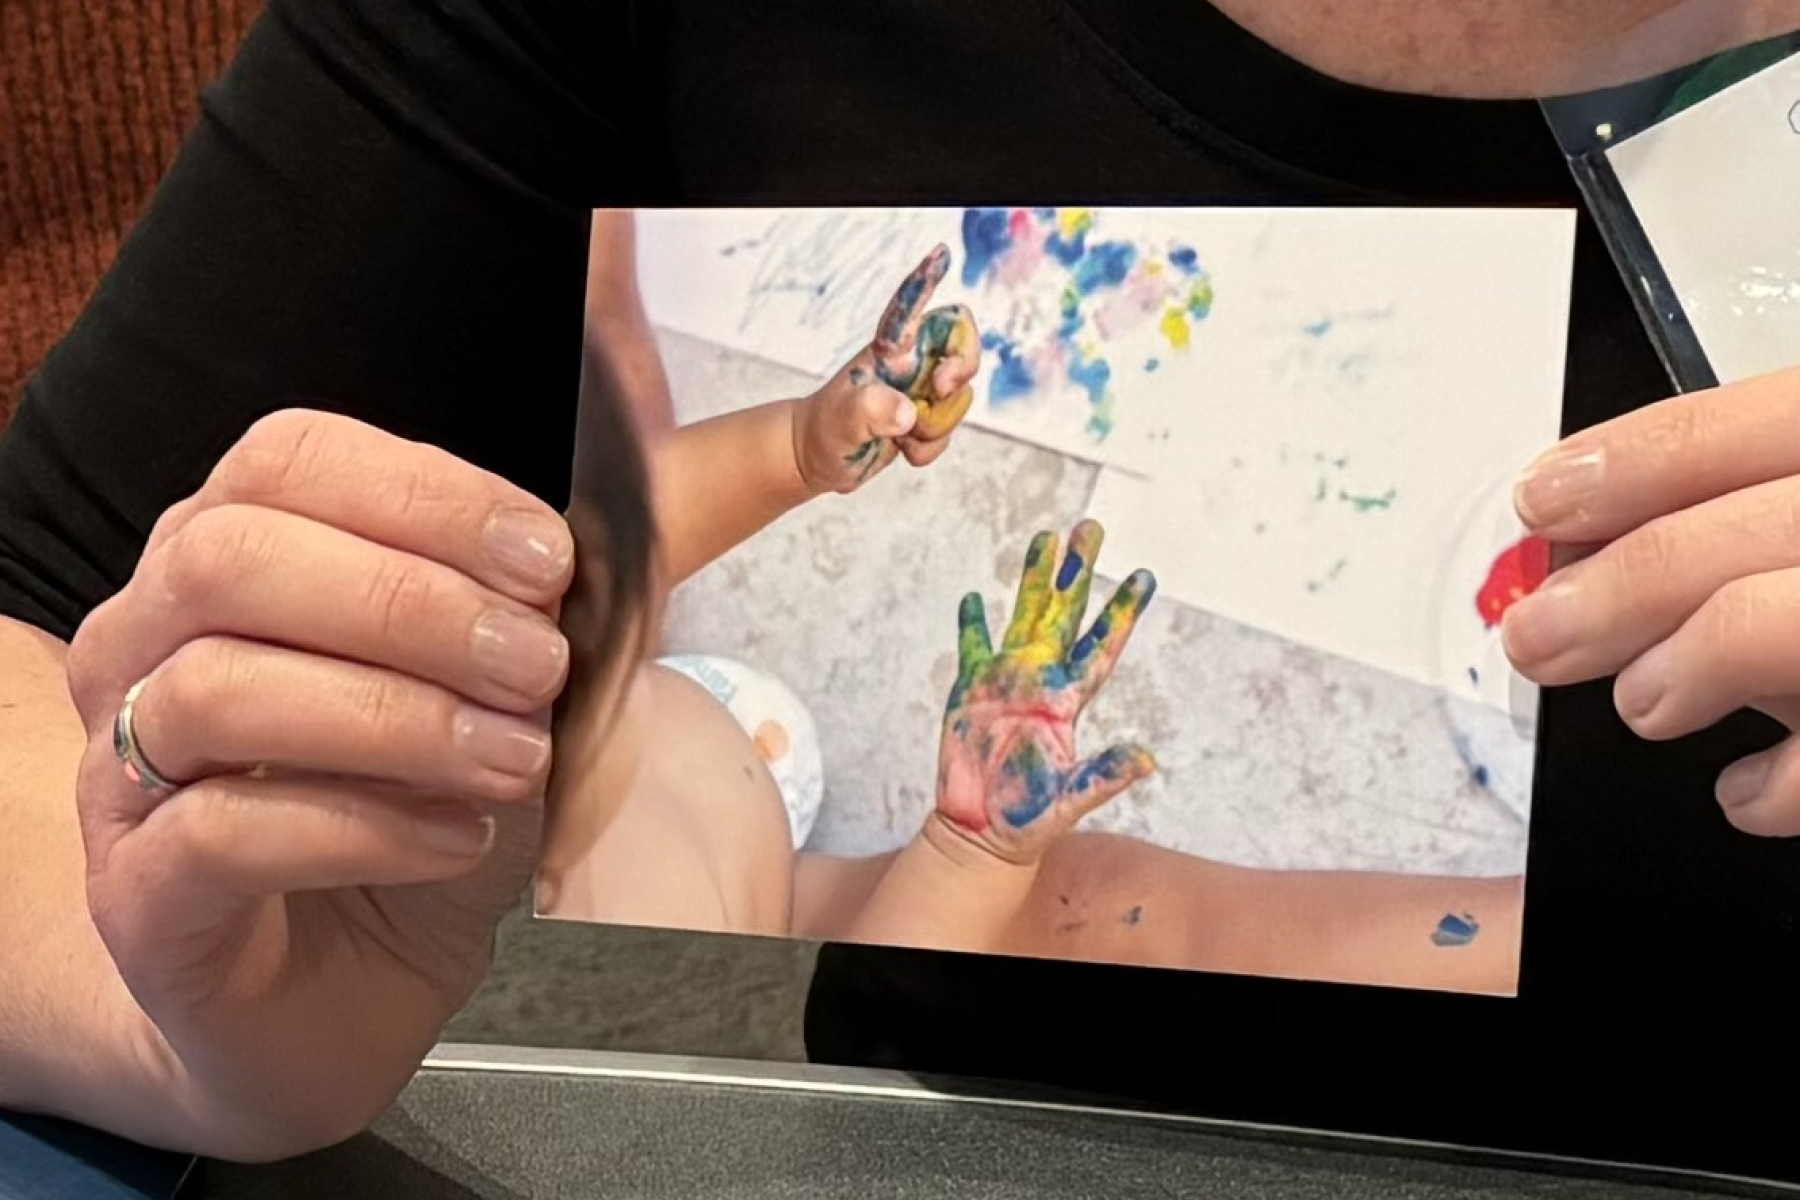 Hands holding up a What is Learning photo card showing toddler with paint